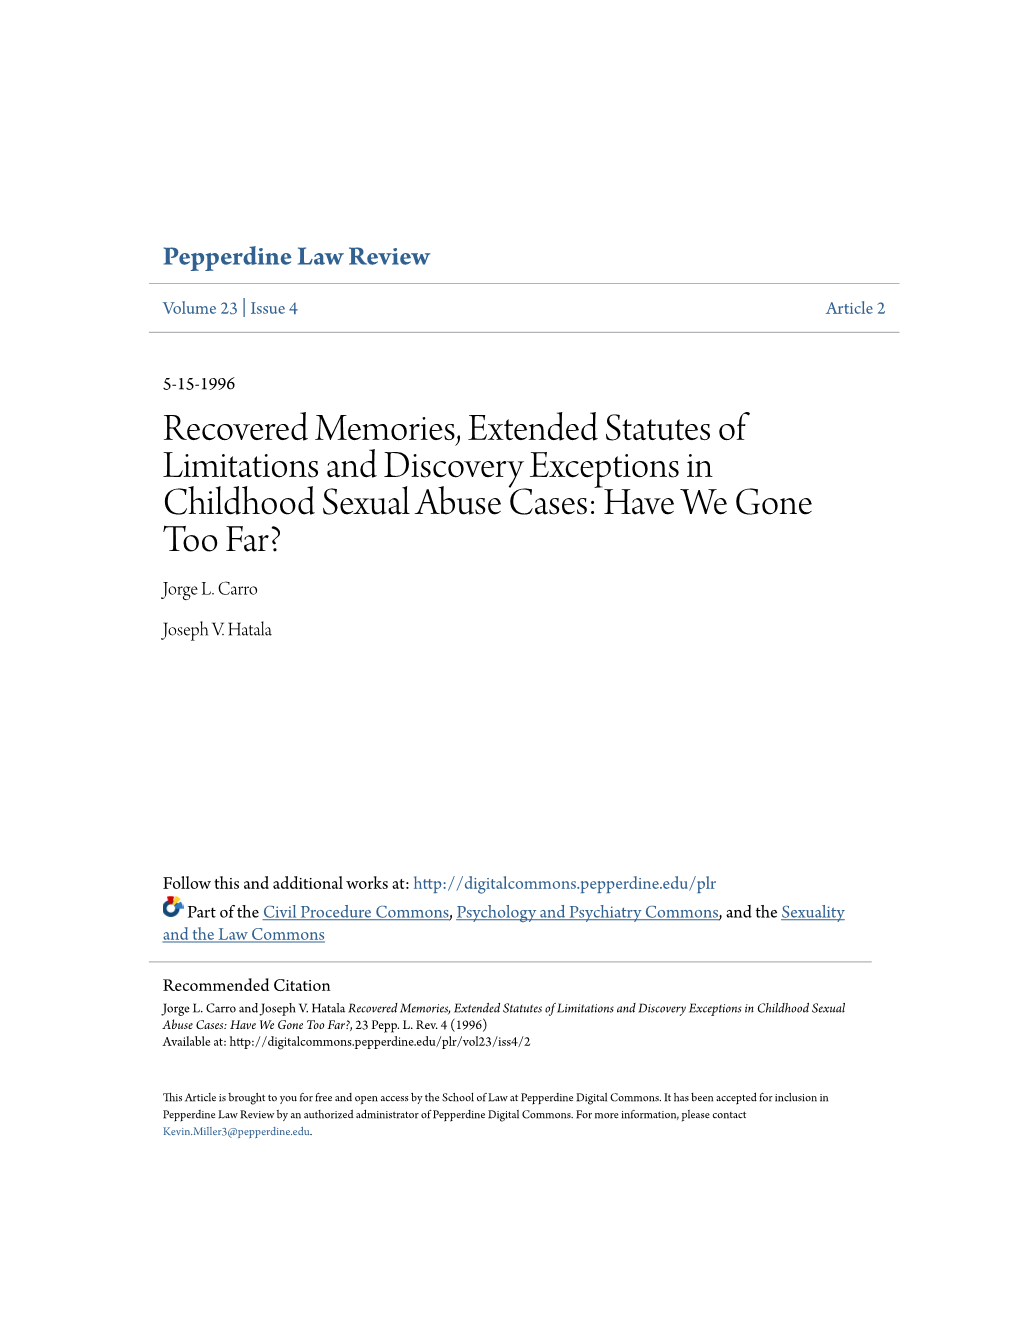 Recovered Memories, Extended Statutes of Limitations and Discovery Exceptions in Childhood Sexual Abuse Cases: Have We Gone Too Far? Jorge L